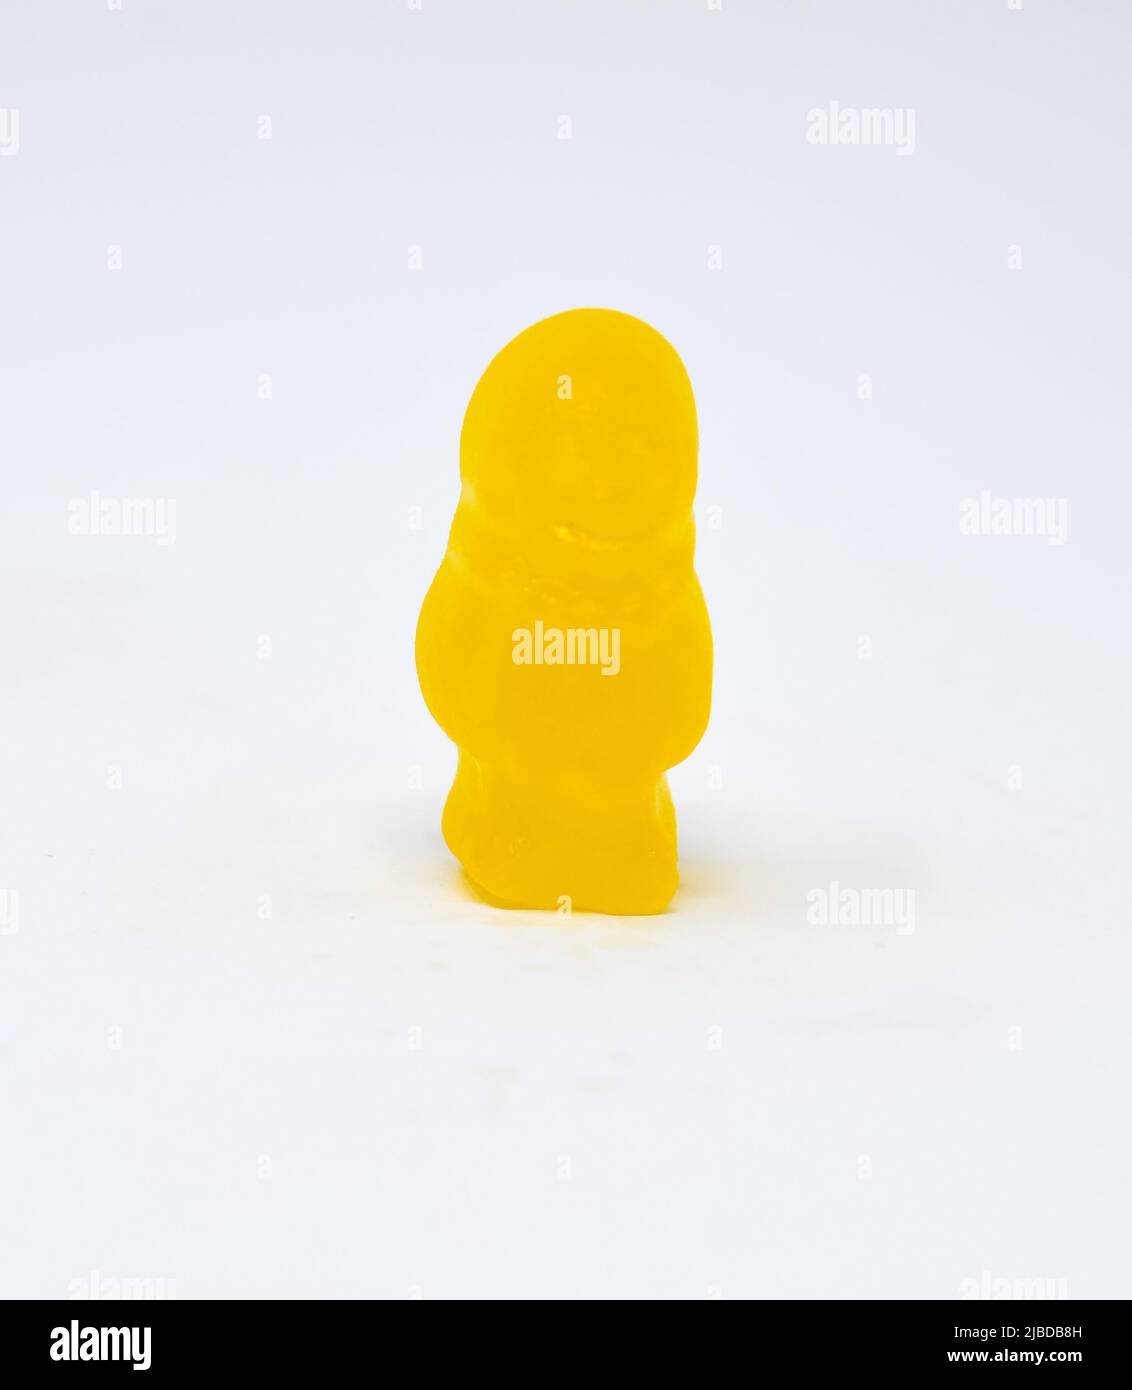 A close up photo of a Yellow Jelly baby Stock Photo